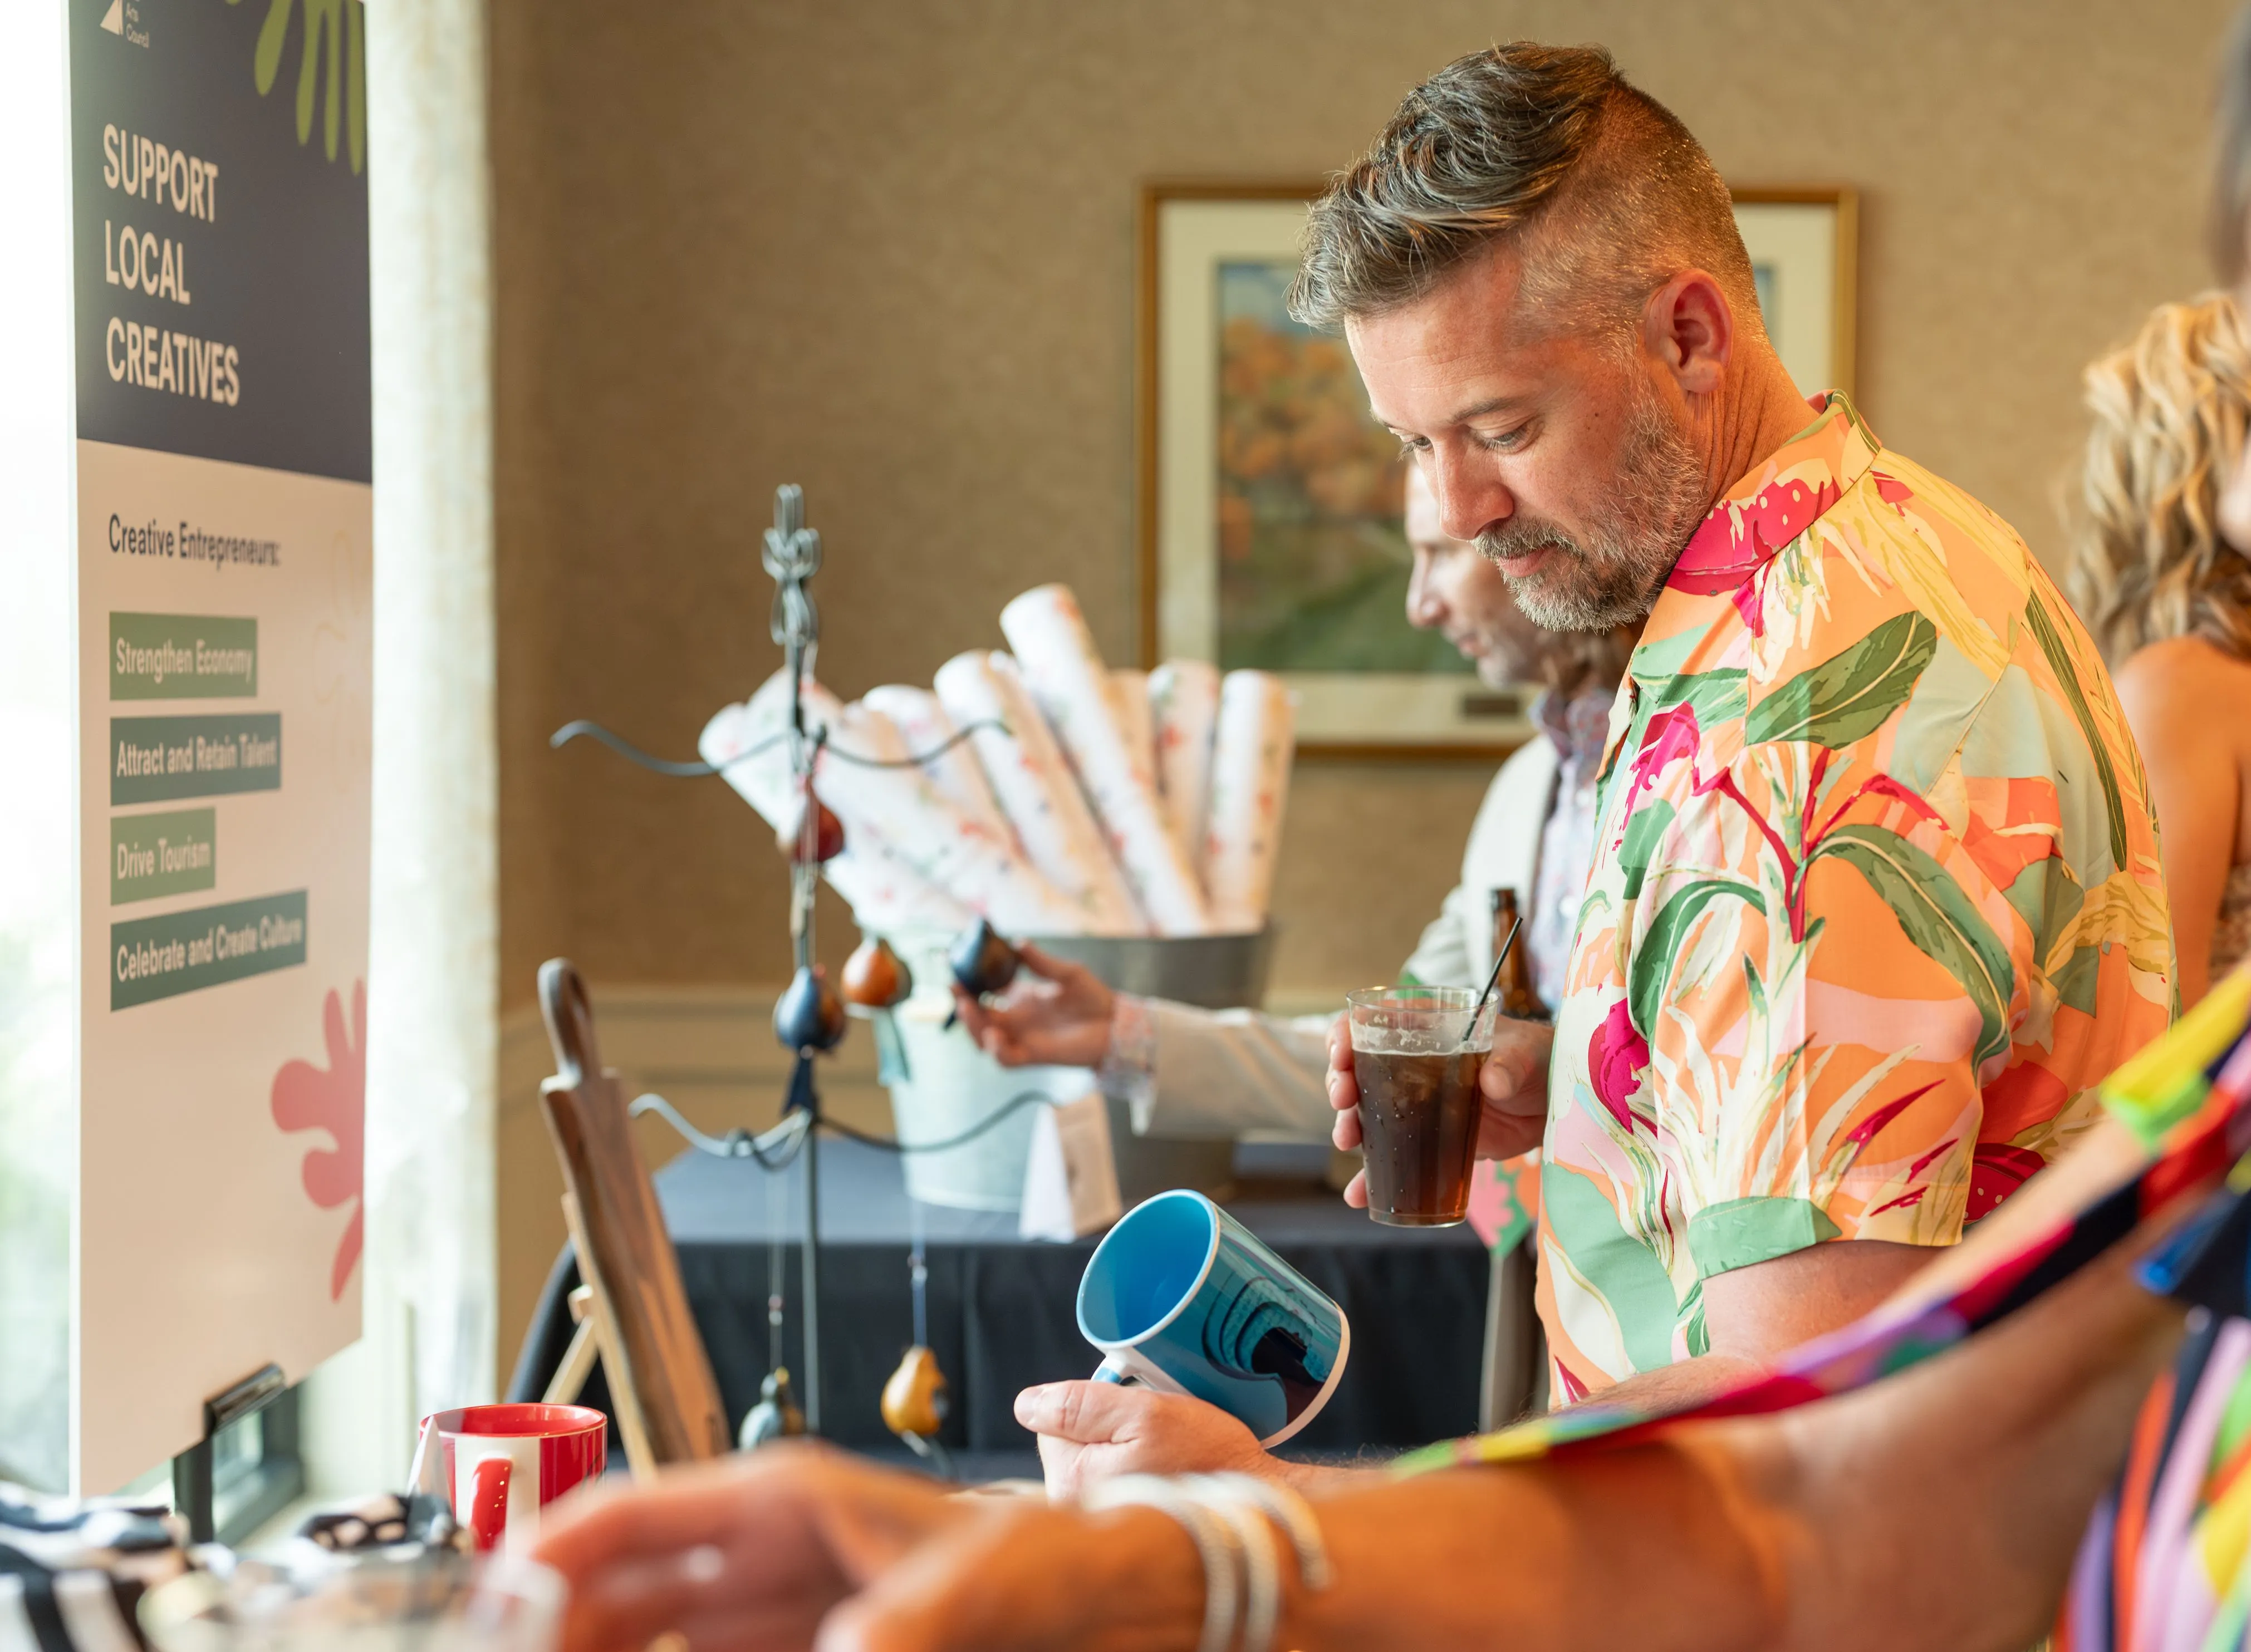 Man in a colorful shirt examining a piece of jewelry with tools at a workshop table.